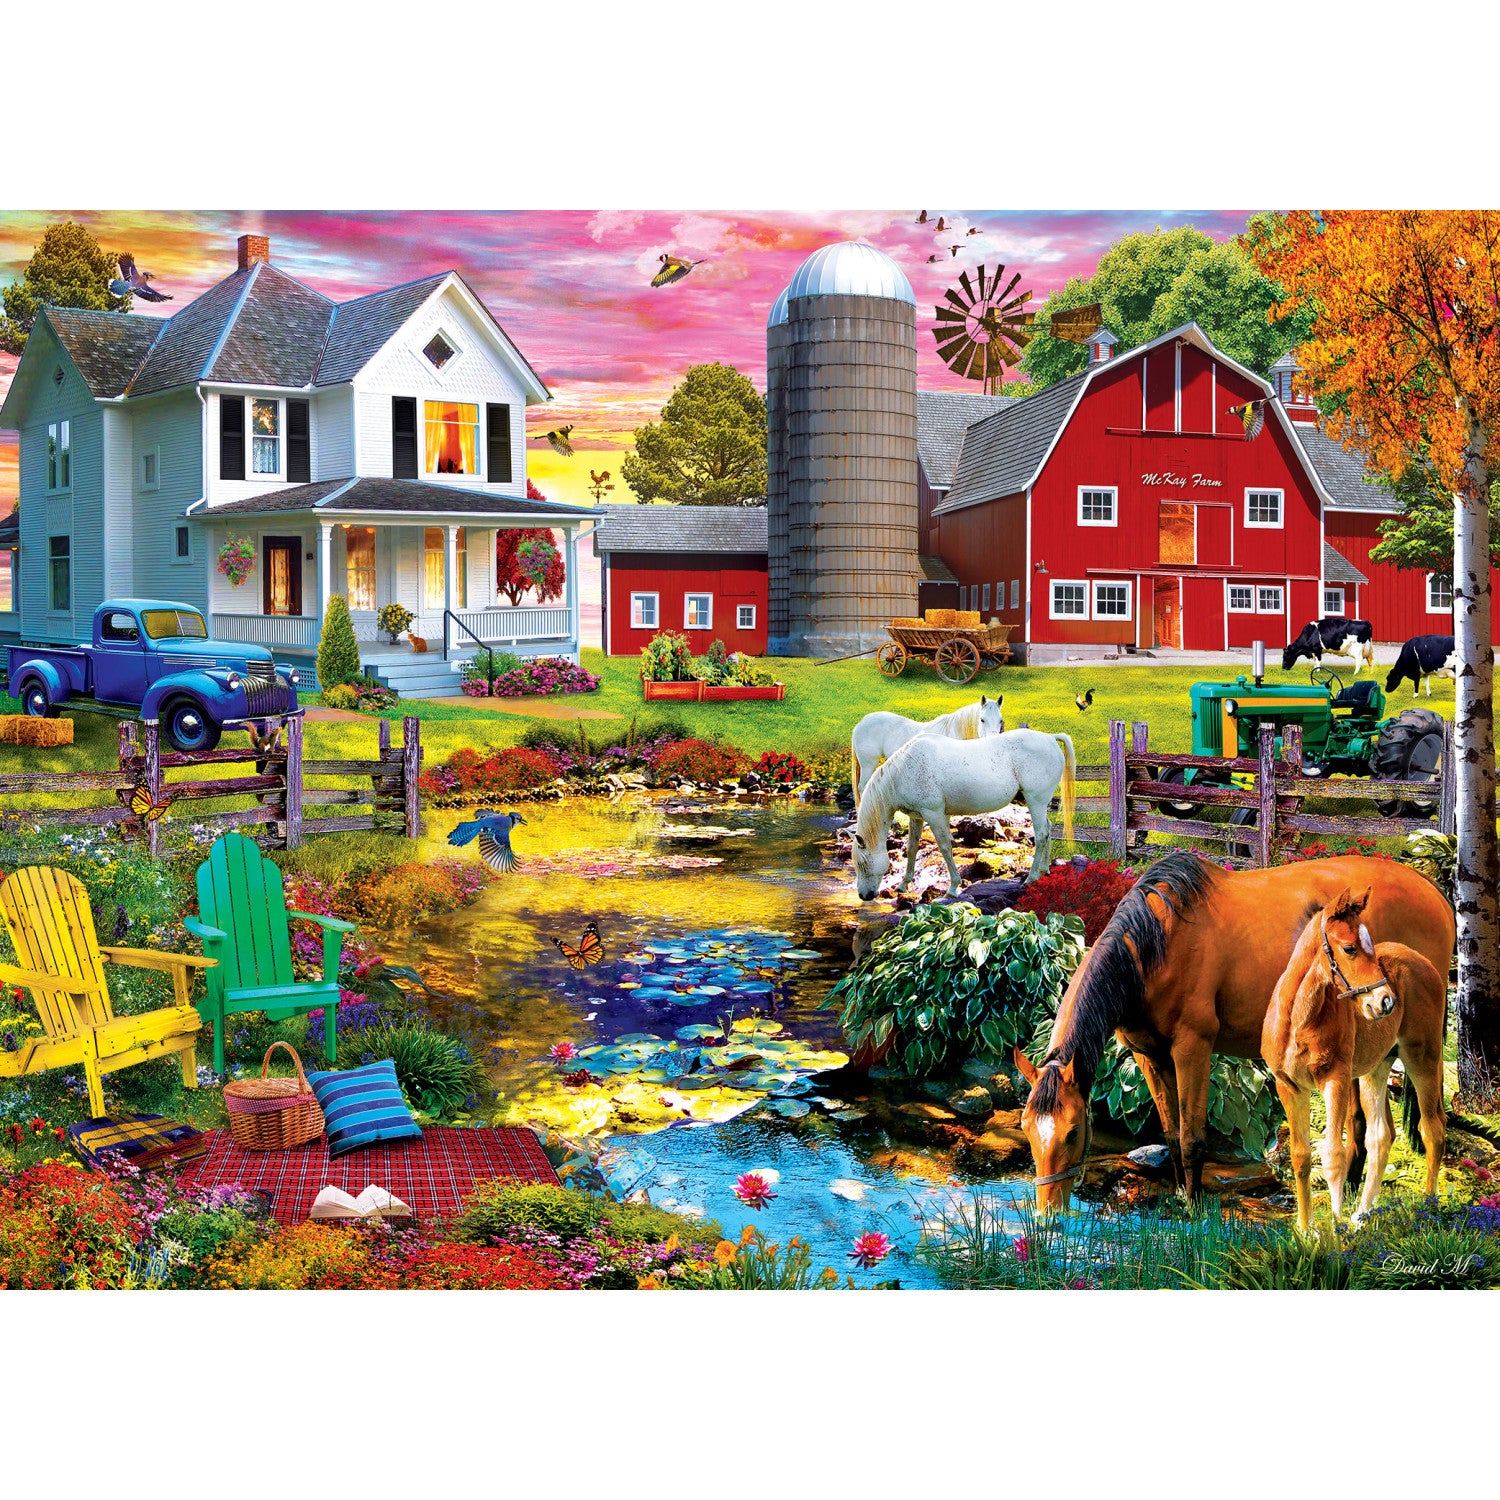 Farm & Country - Picnic on the Farm 1000 Piece Puzzle